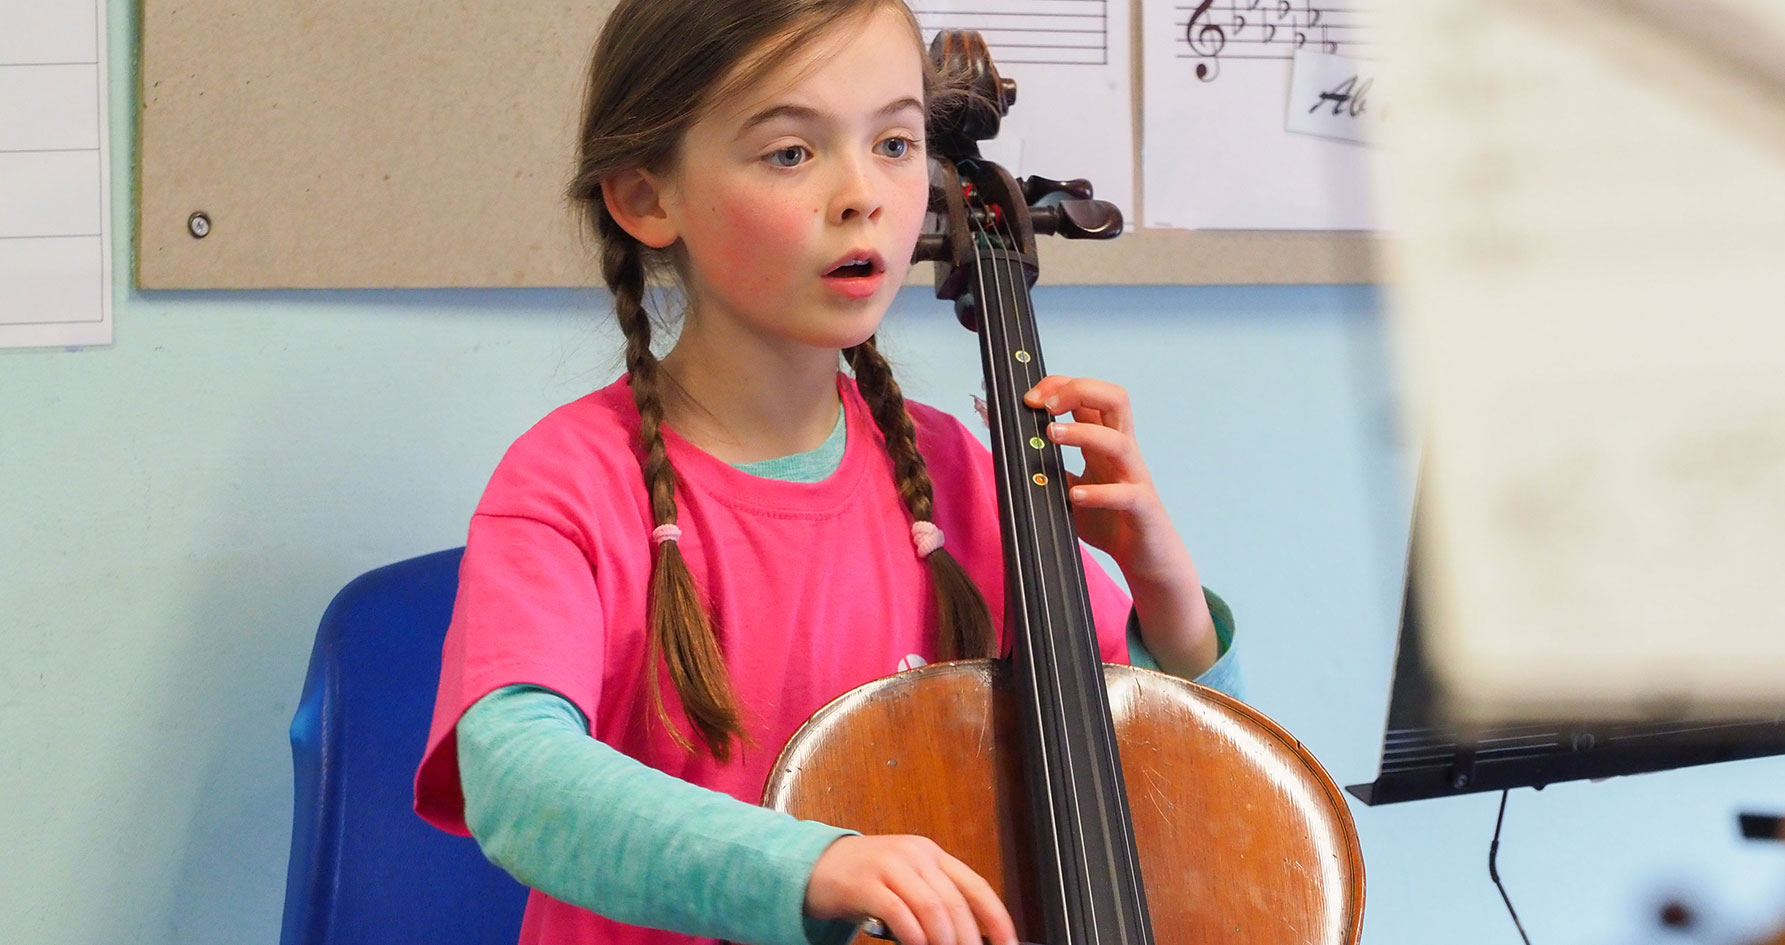 A girl playing an instrument